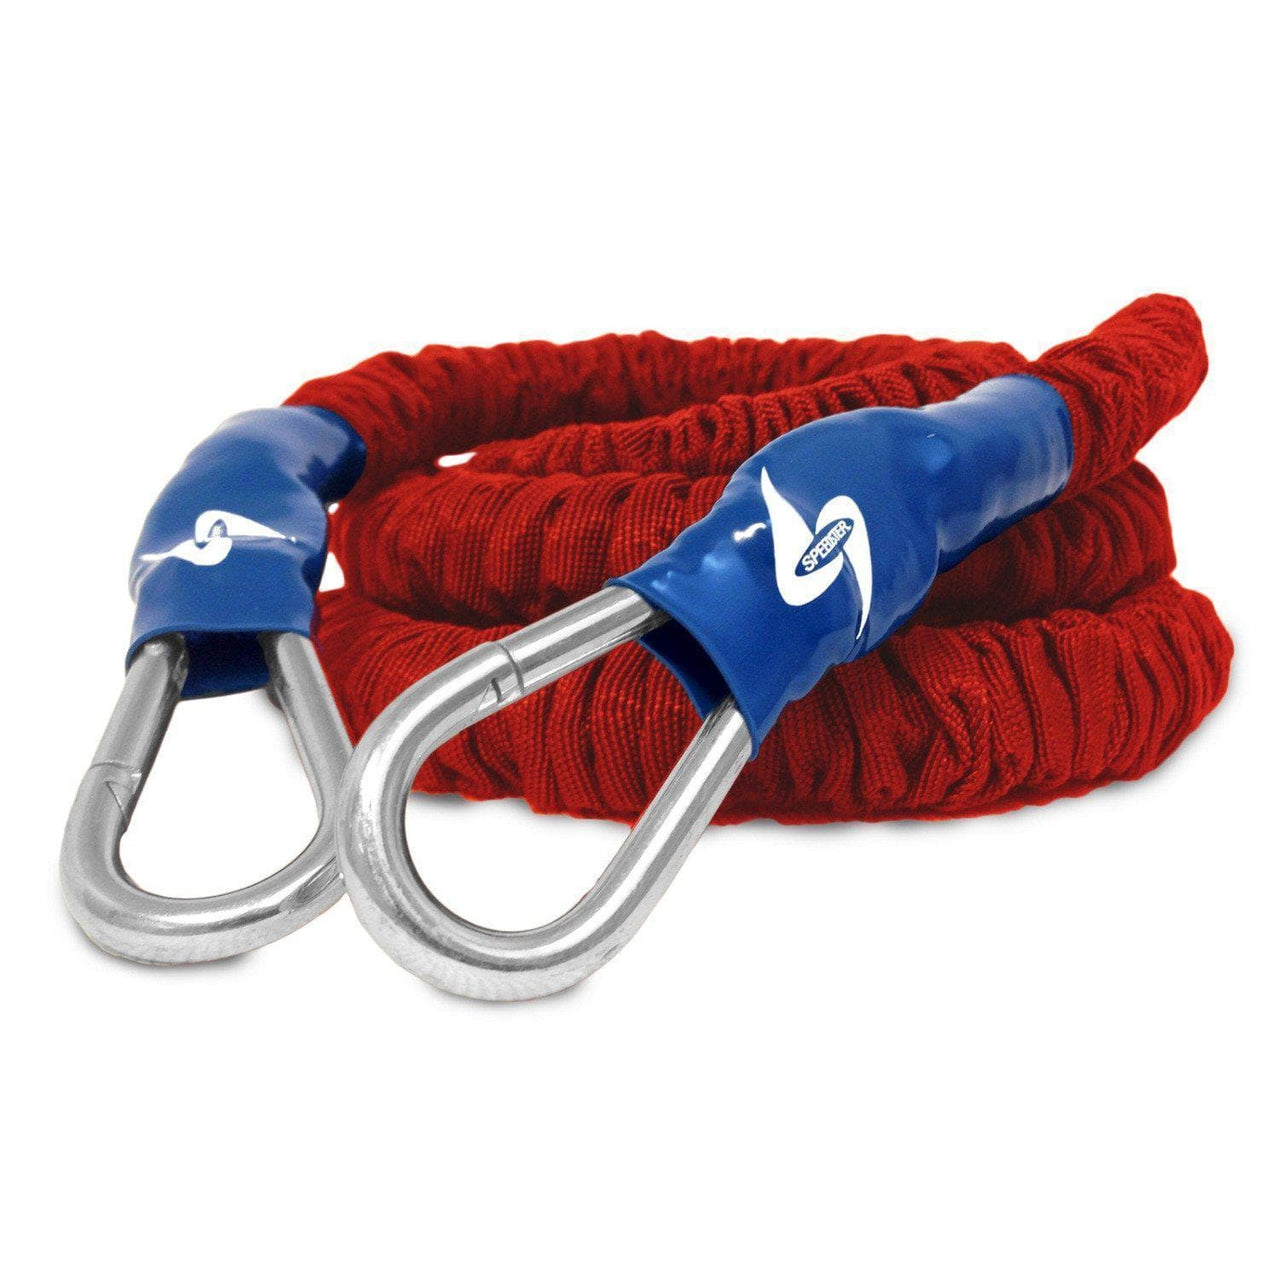 safe professional grade resistance bungee for speed and agility training for facilities, personal trainers, athletic trainers, coaches, and organizations. Offered in bulk for discounts 